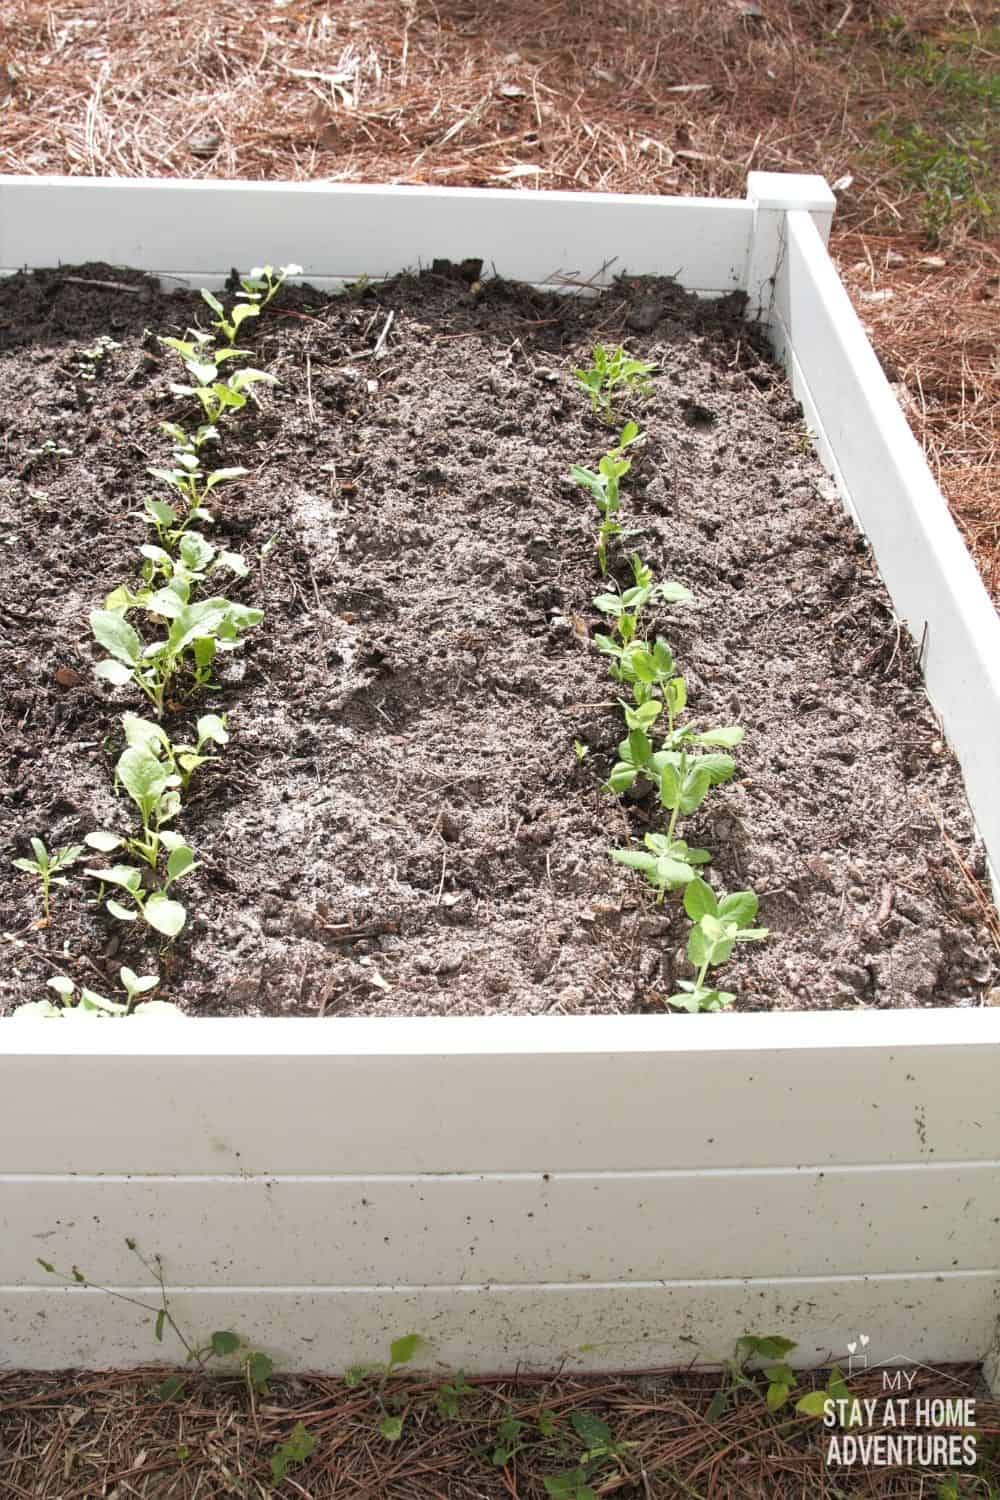 New to gardening? Learn how to build raised vegetable garden beds including what wood to use, how to build one for less than $15. via @mystayathome